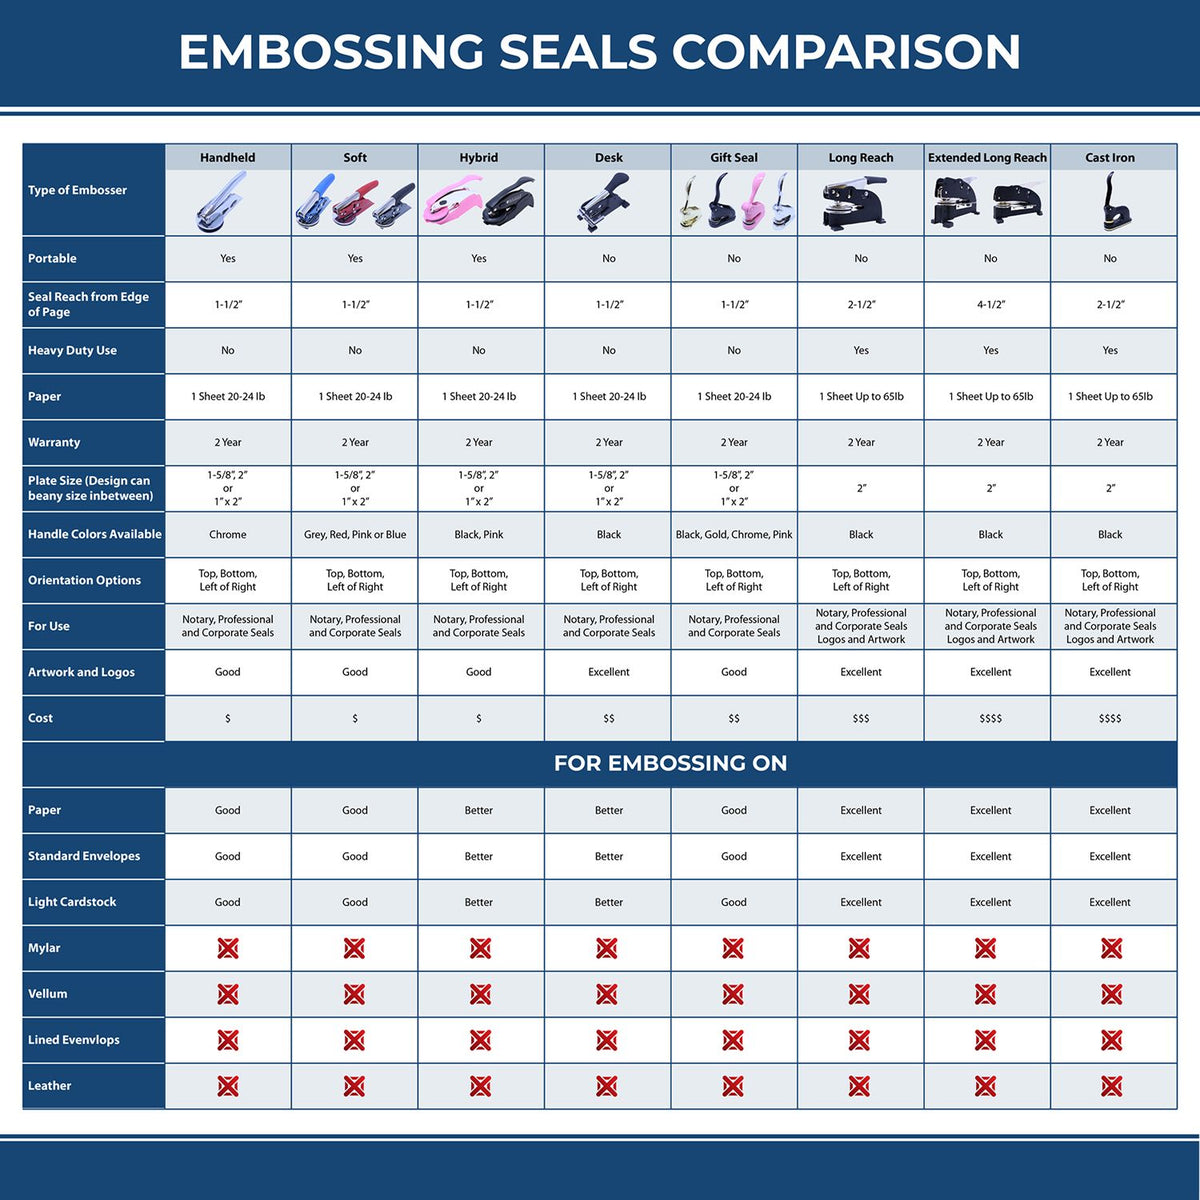 A comparison chart for the different types of mount models available for the Florida Desk Surveyor Seal Embosser.